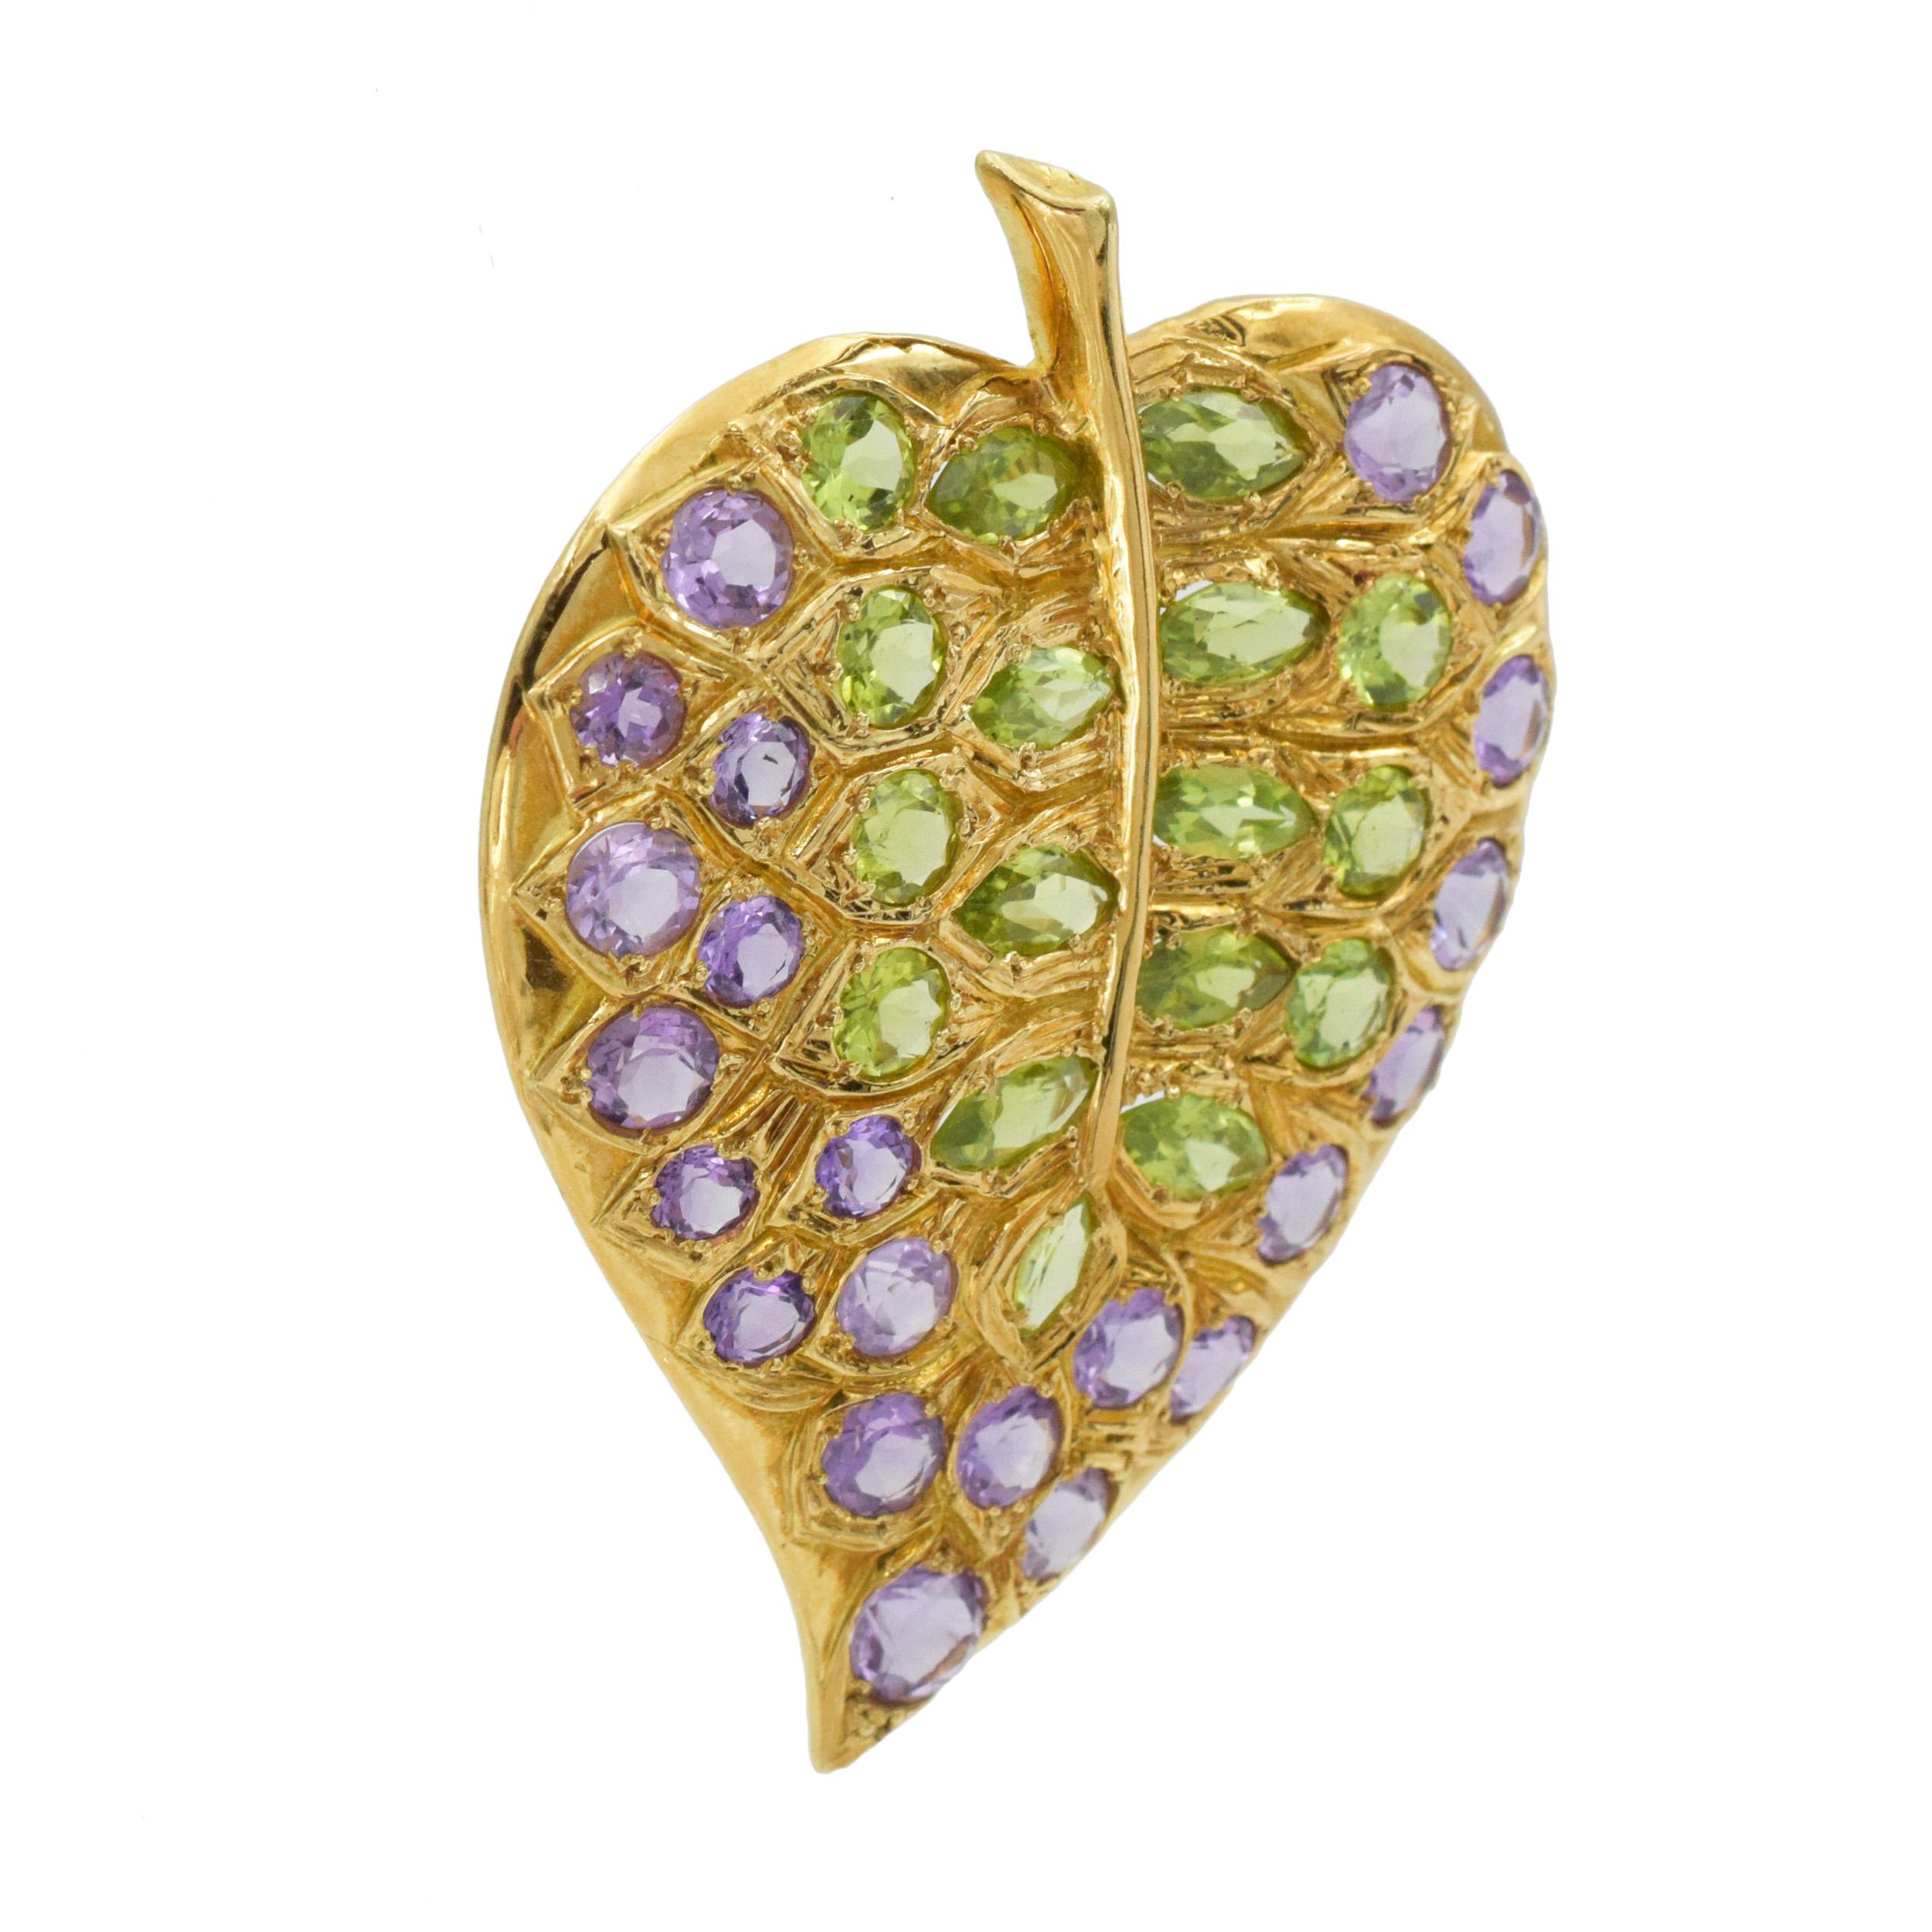 Pair of Amethyst and Peridot Leaf Brooches 1